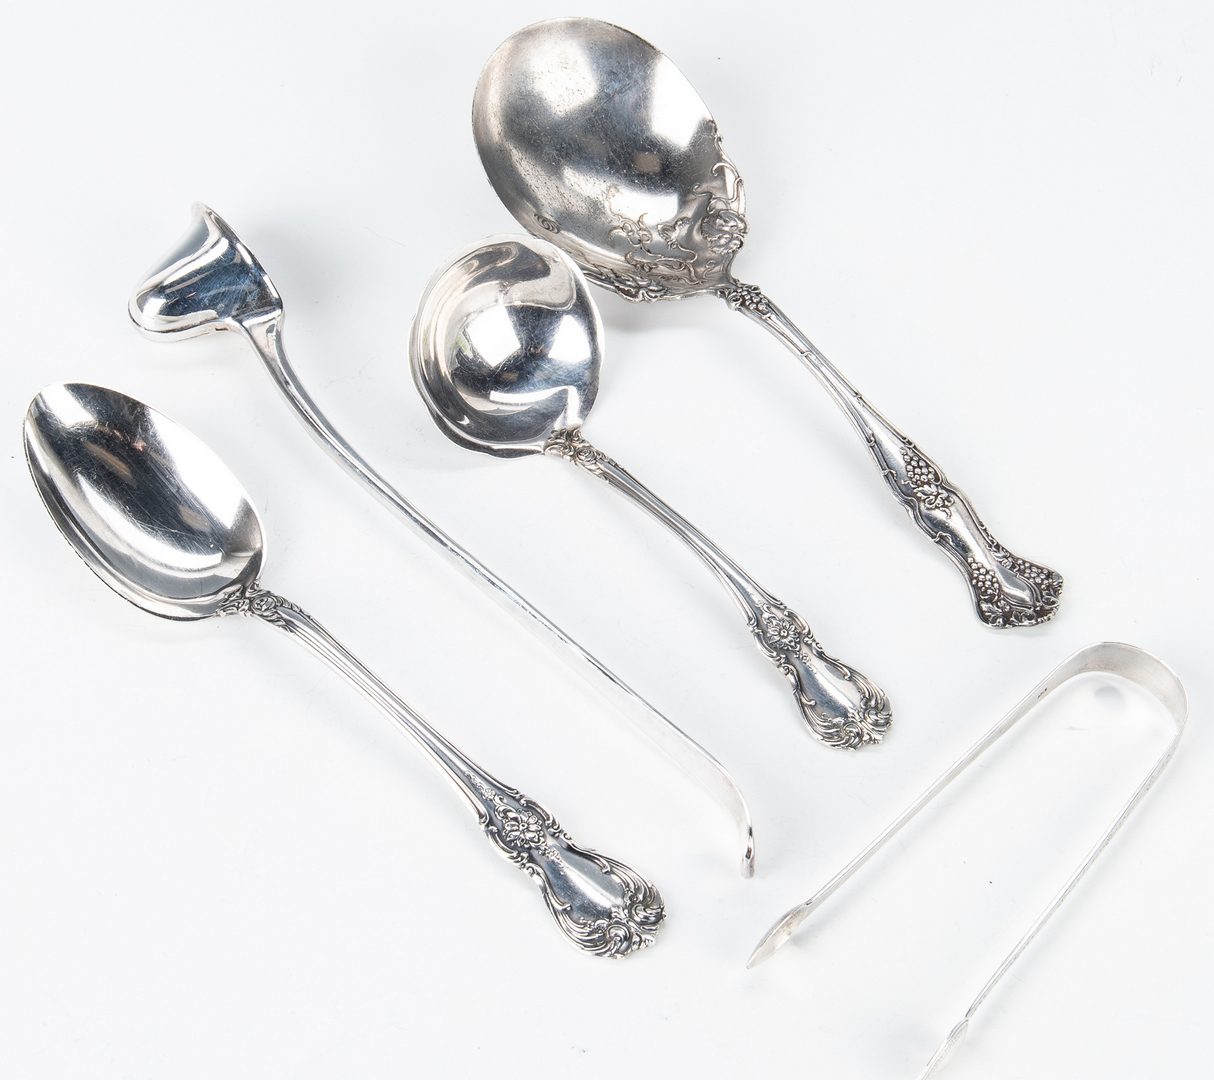 Lot 456: Towle Old Master Sterling Flatware and others